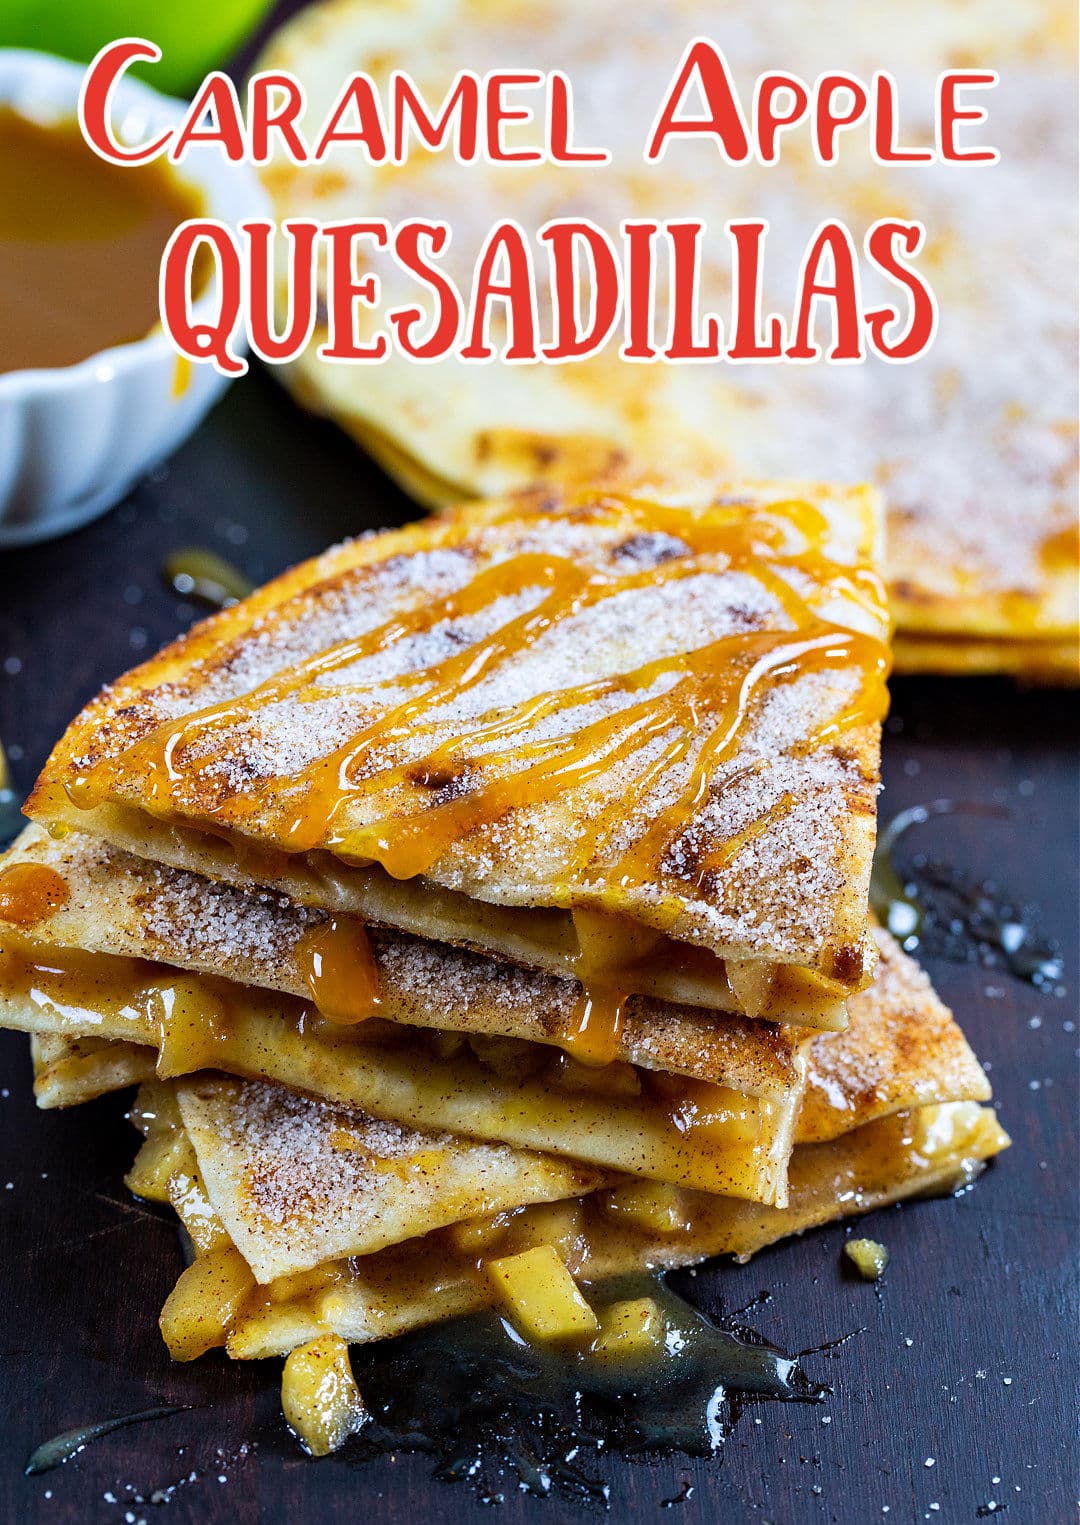 Quesadillas drizzled with caramel sauce.